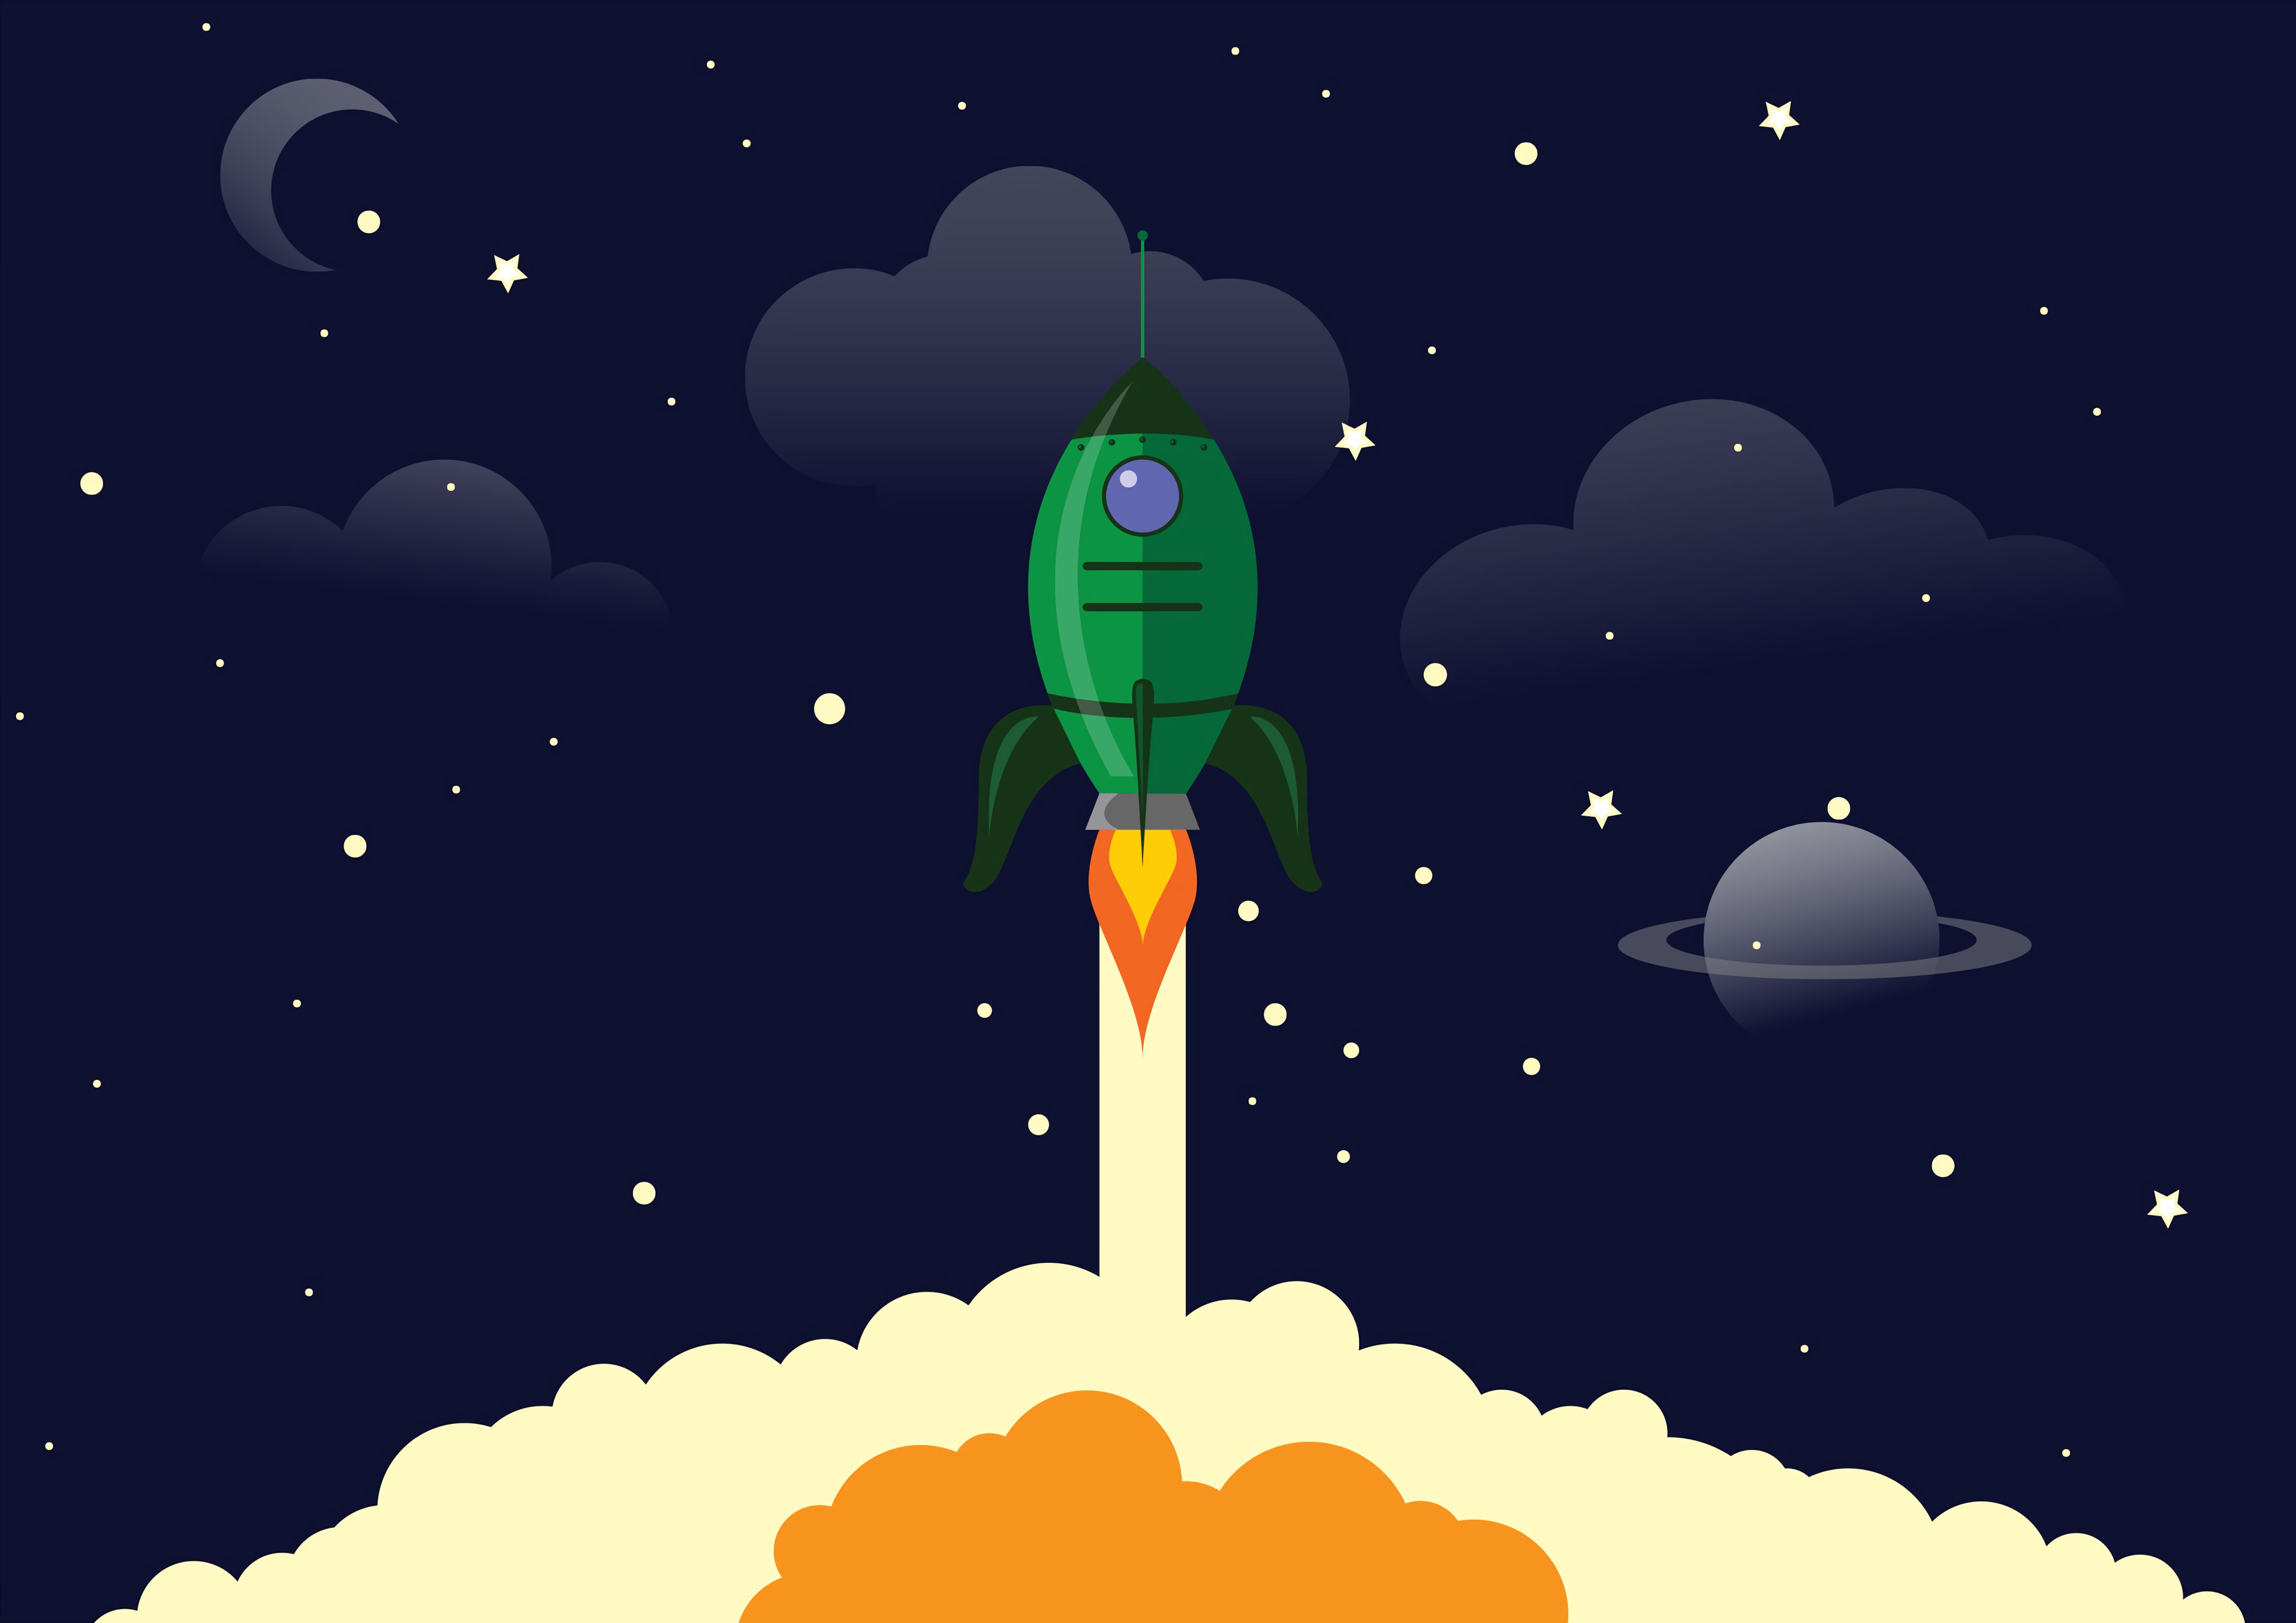 78271 download wallpaper art, universe, vector, rocket, launch, launching screensavers and pictures for free